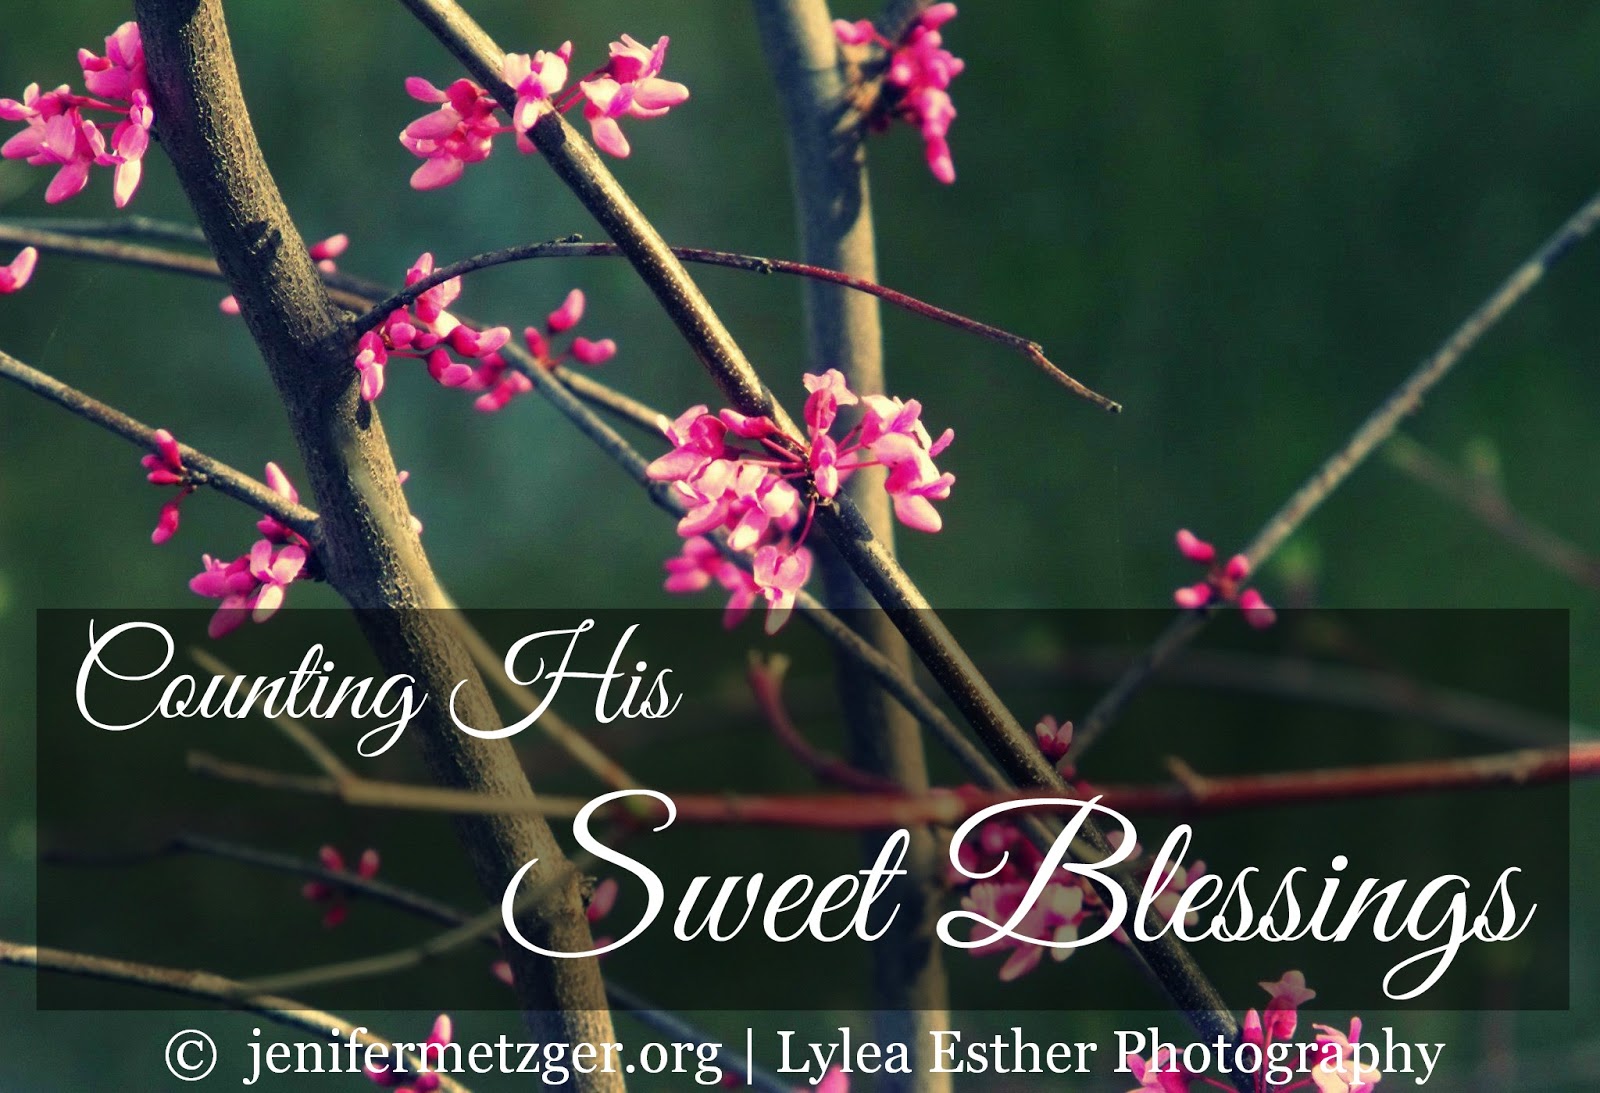 Counting His Sweet #blessings. #thanksgiving #gratefulness #joydare